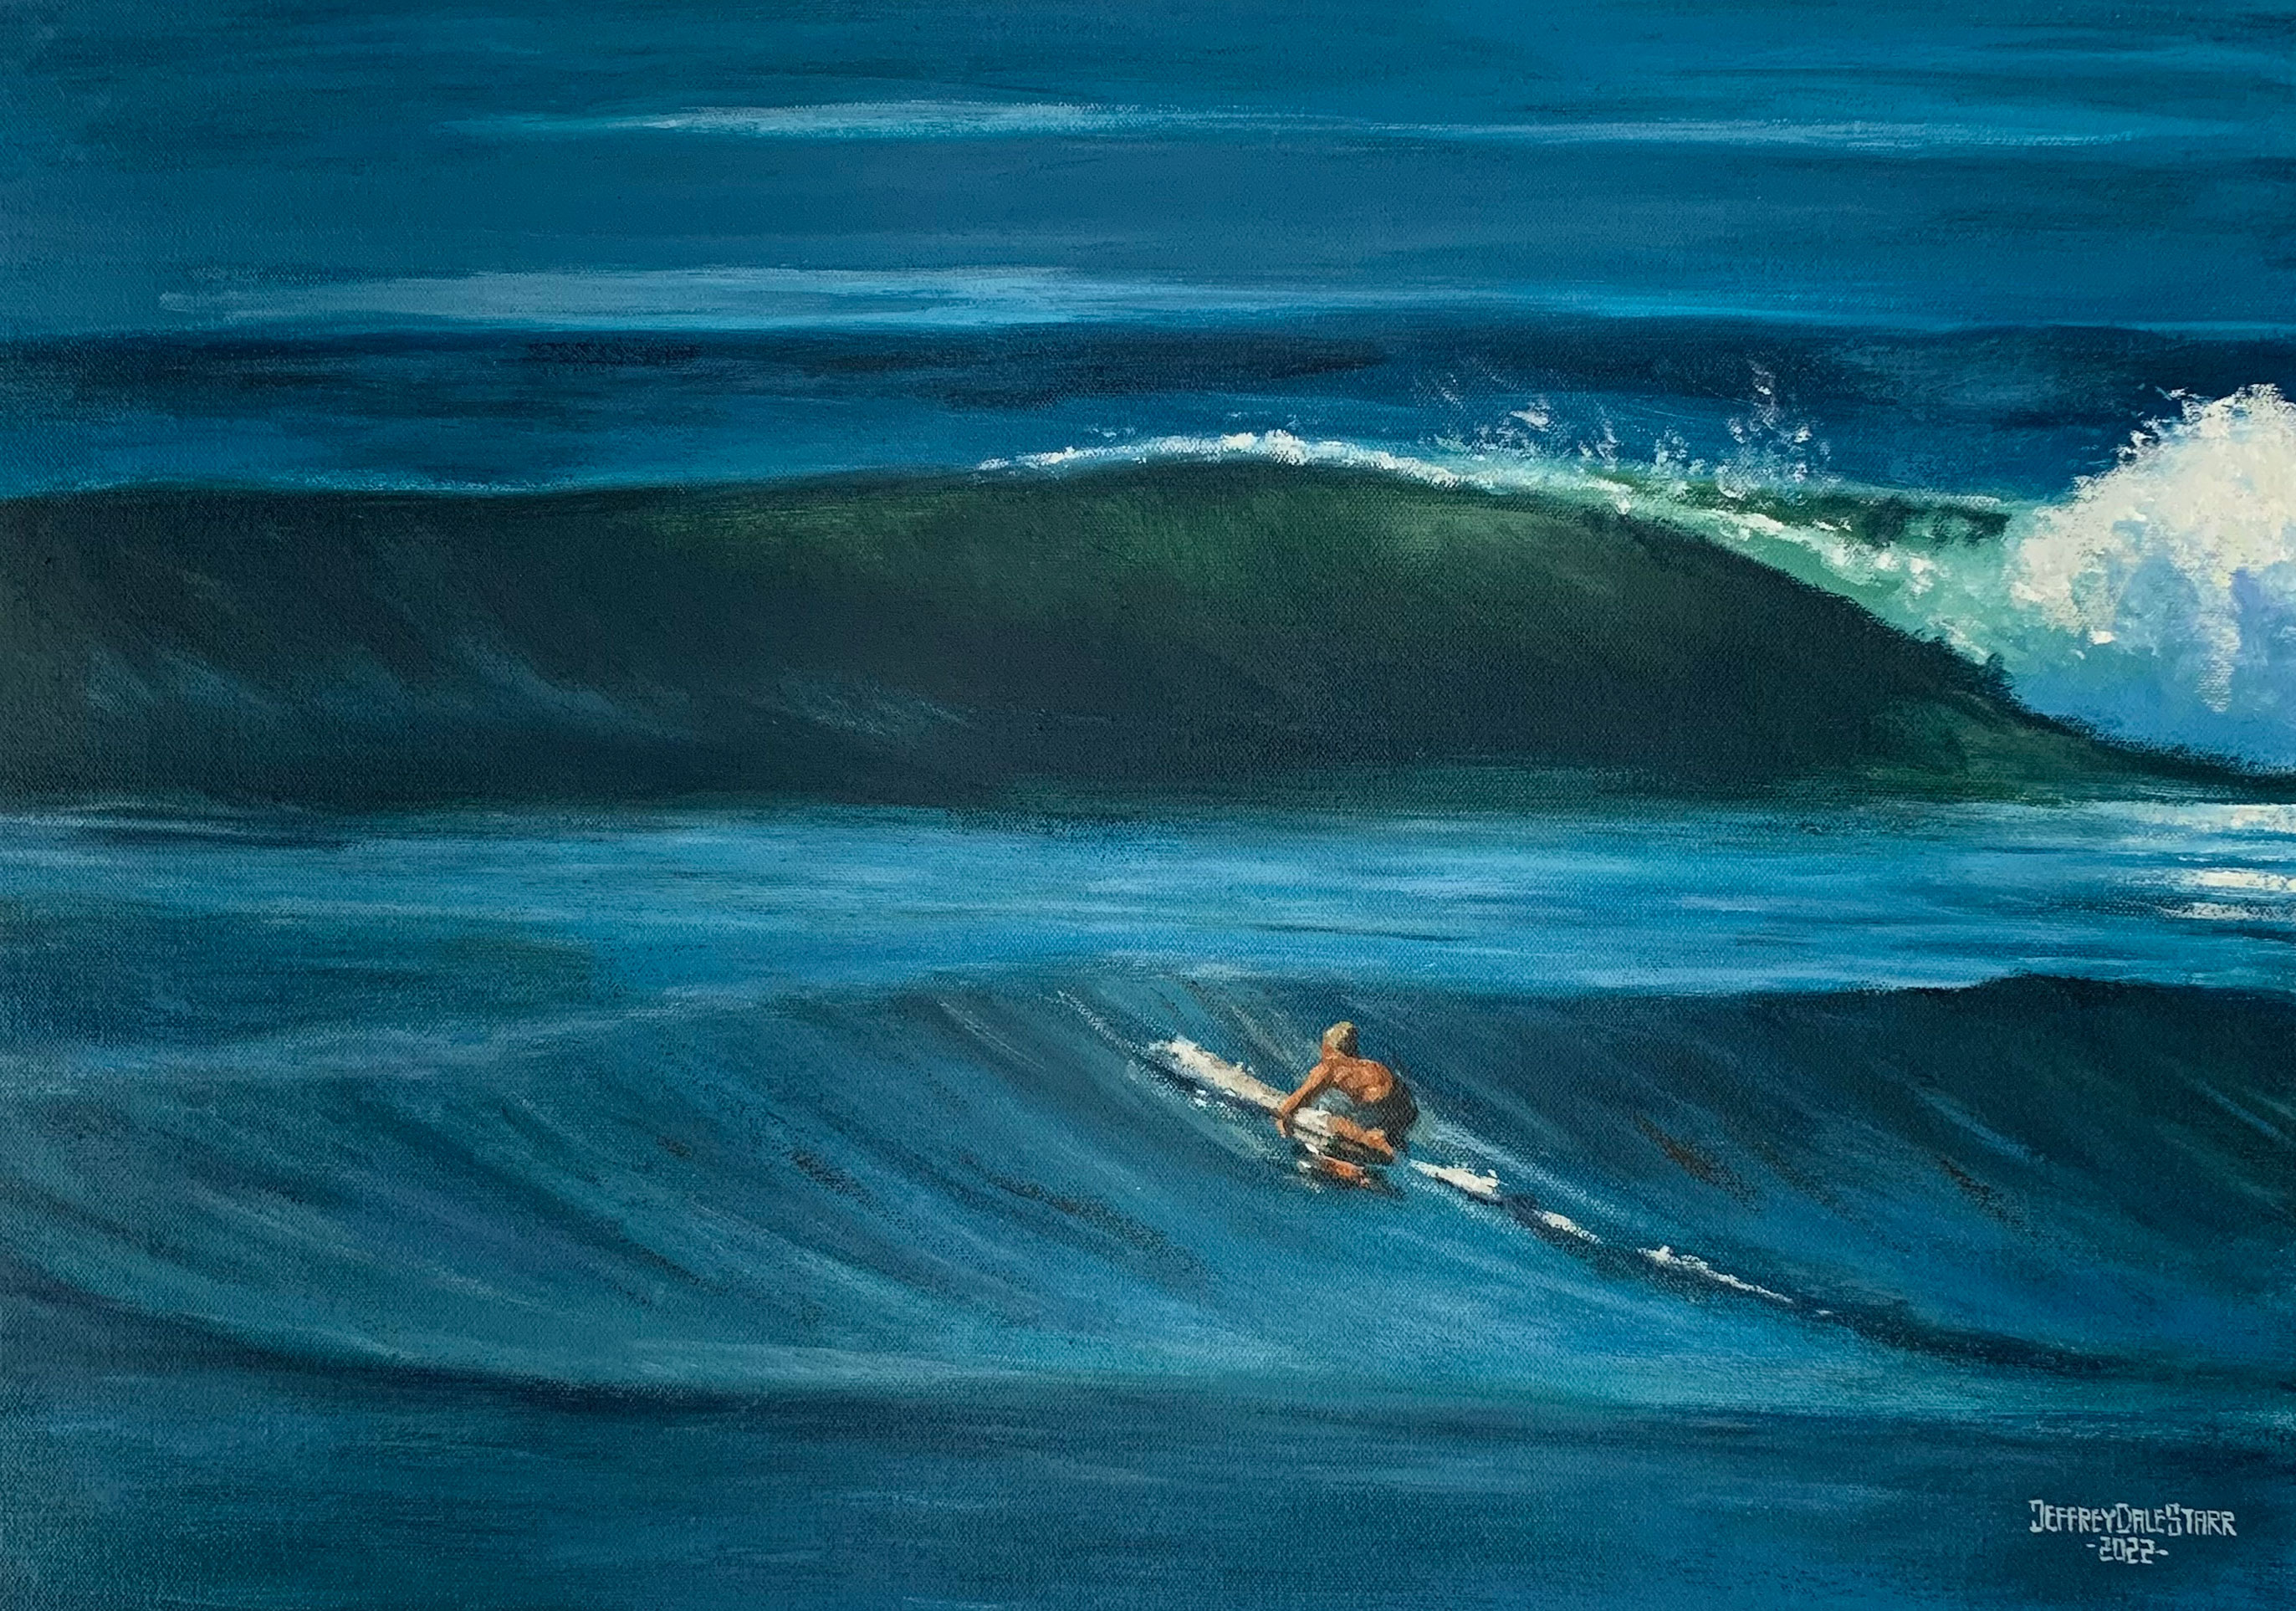 The Surfer by Jeffrey Dale Starr